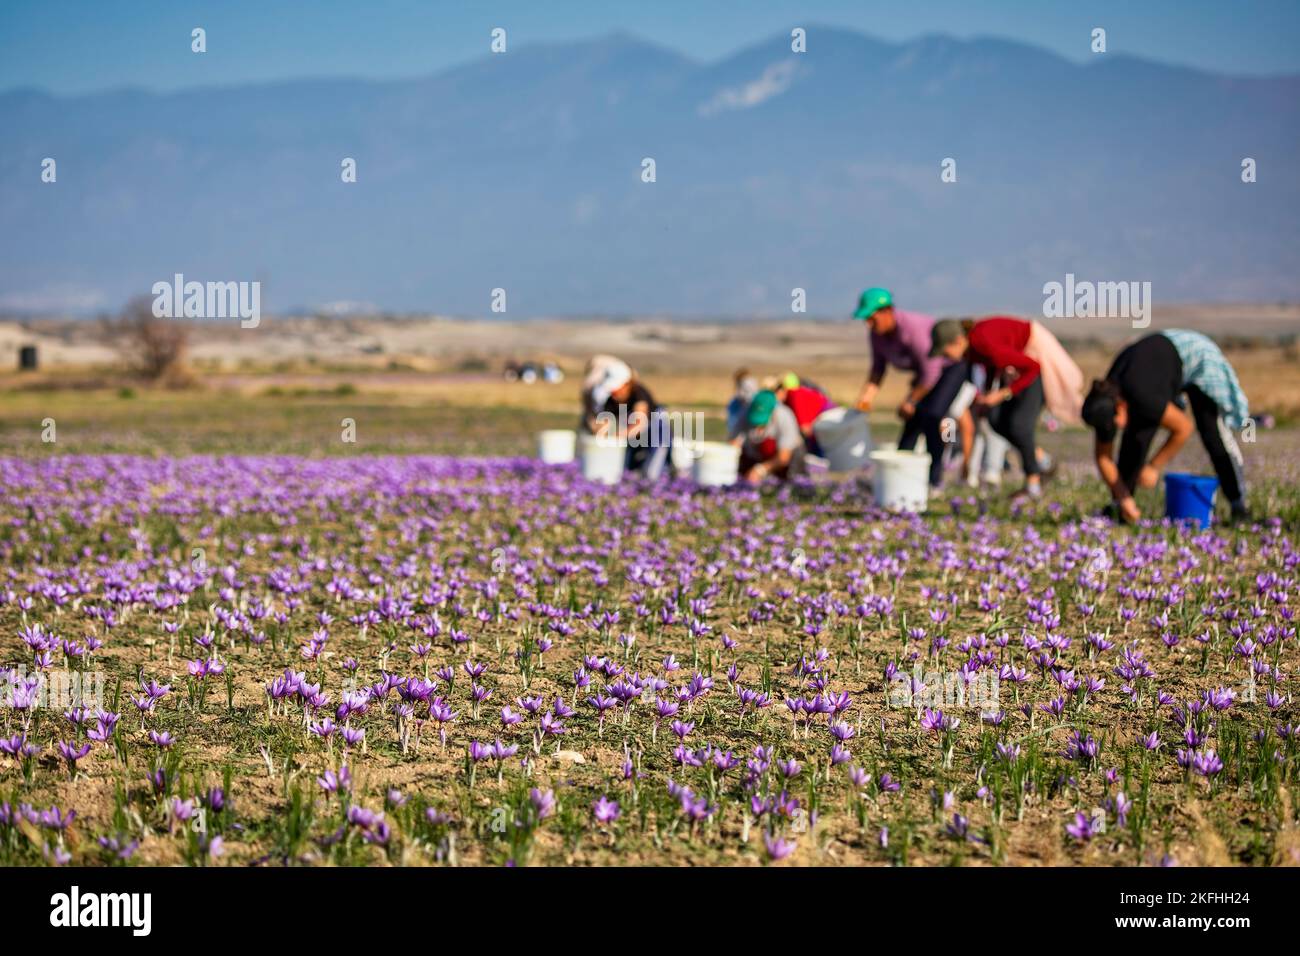 Workers gathering saffron flowers during saffron harvesting season in the area of Kozani in northern Greece. Selective focus Stock Photo